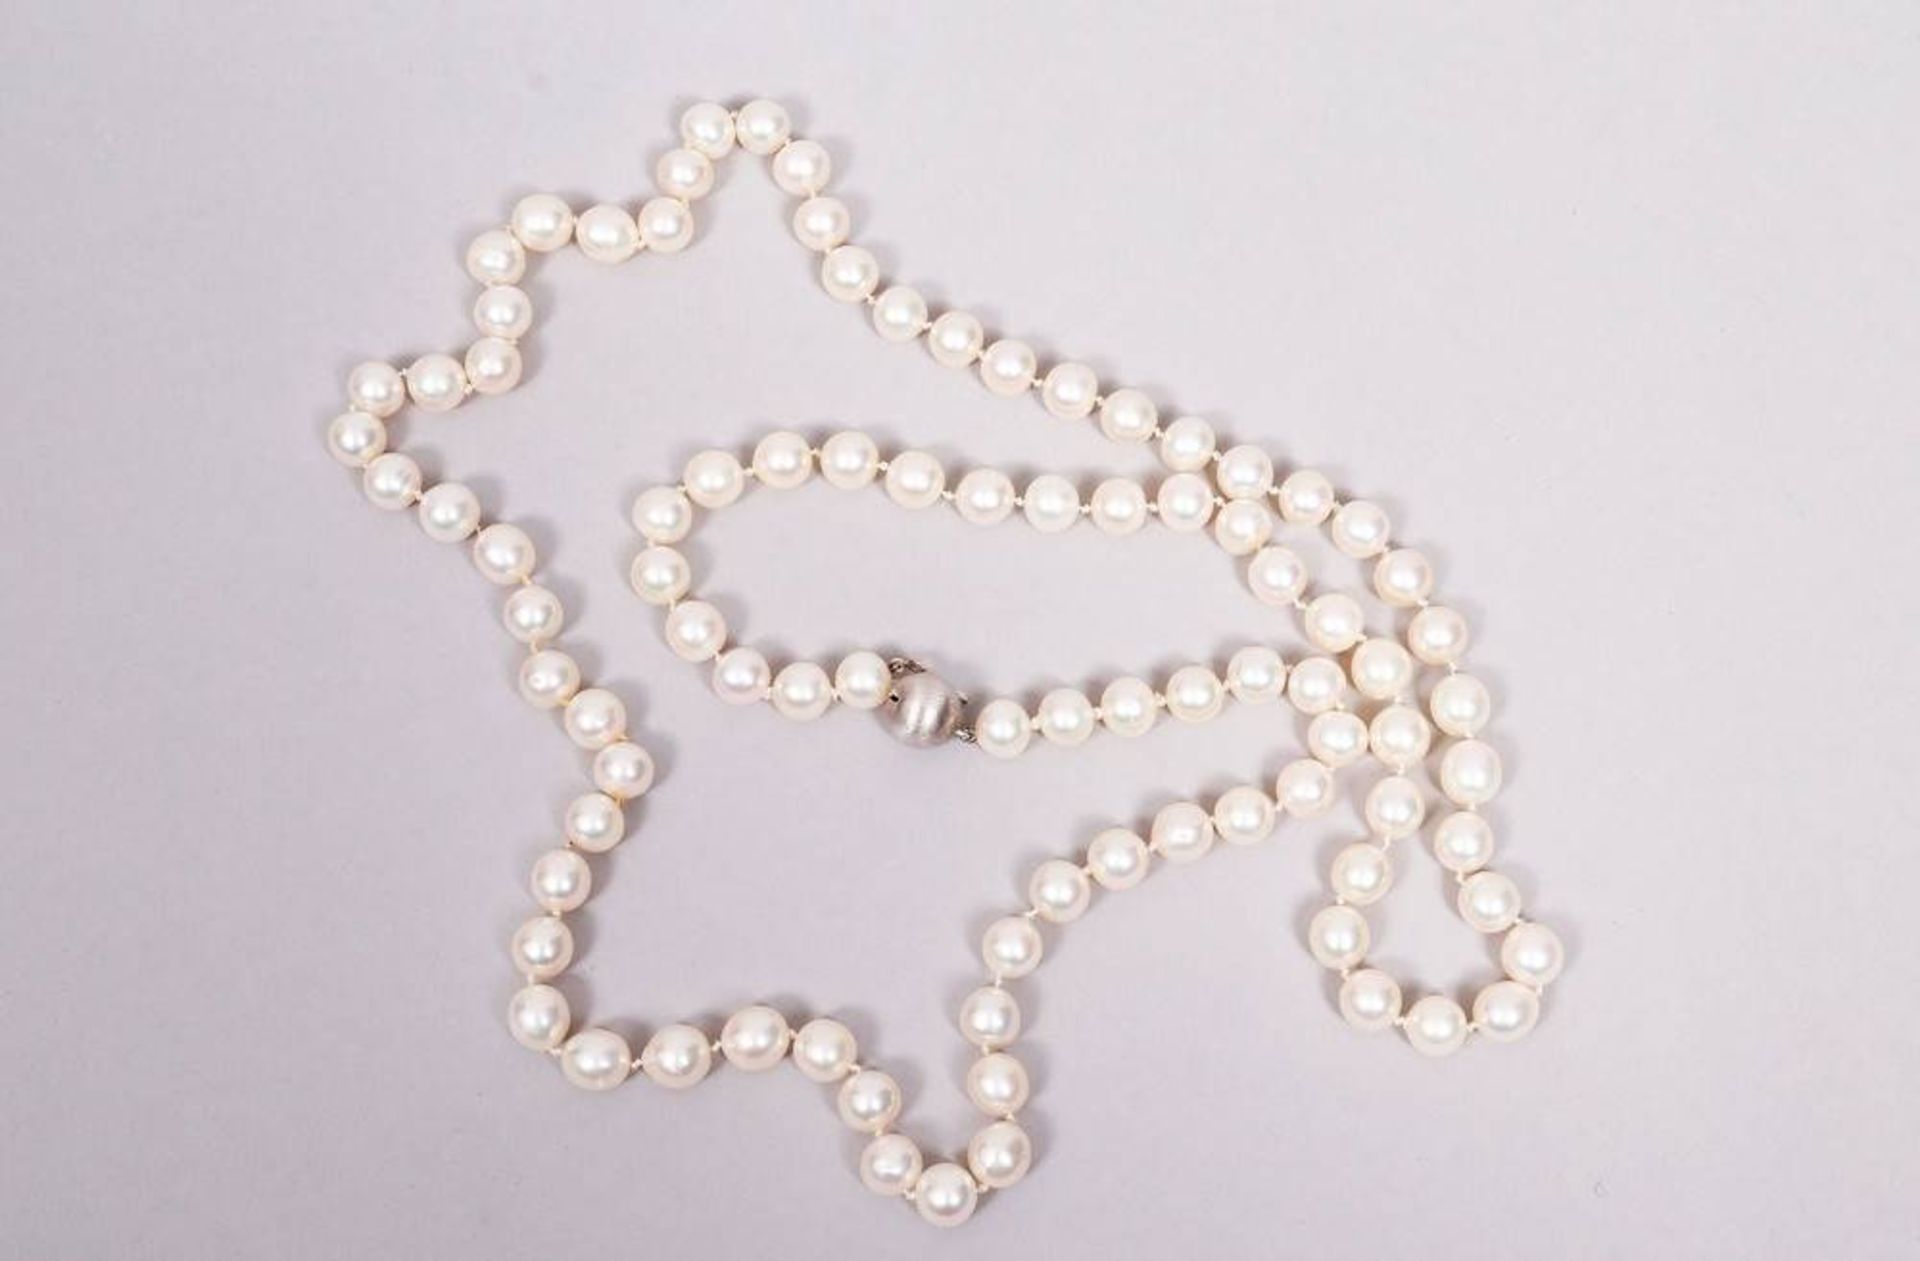 Pearl necklace, 585 WG ball clasp - Image 3 of 4